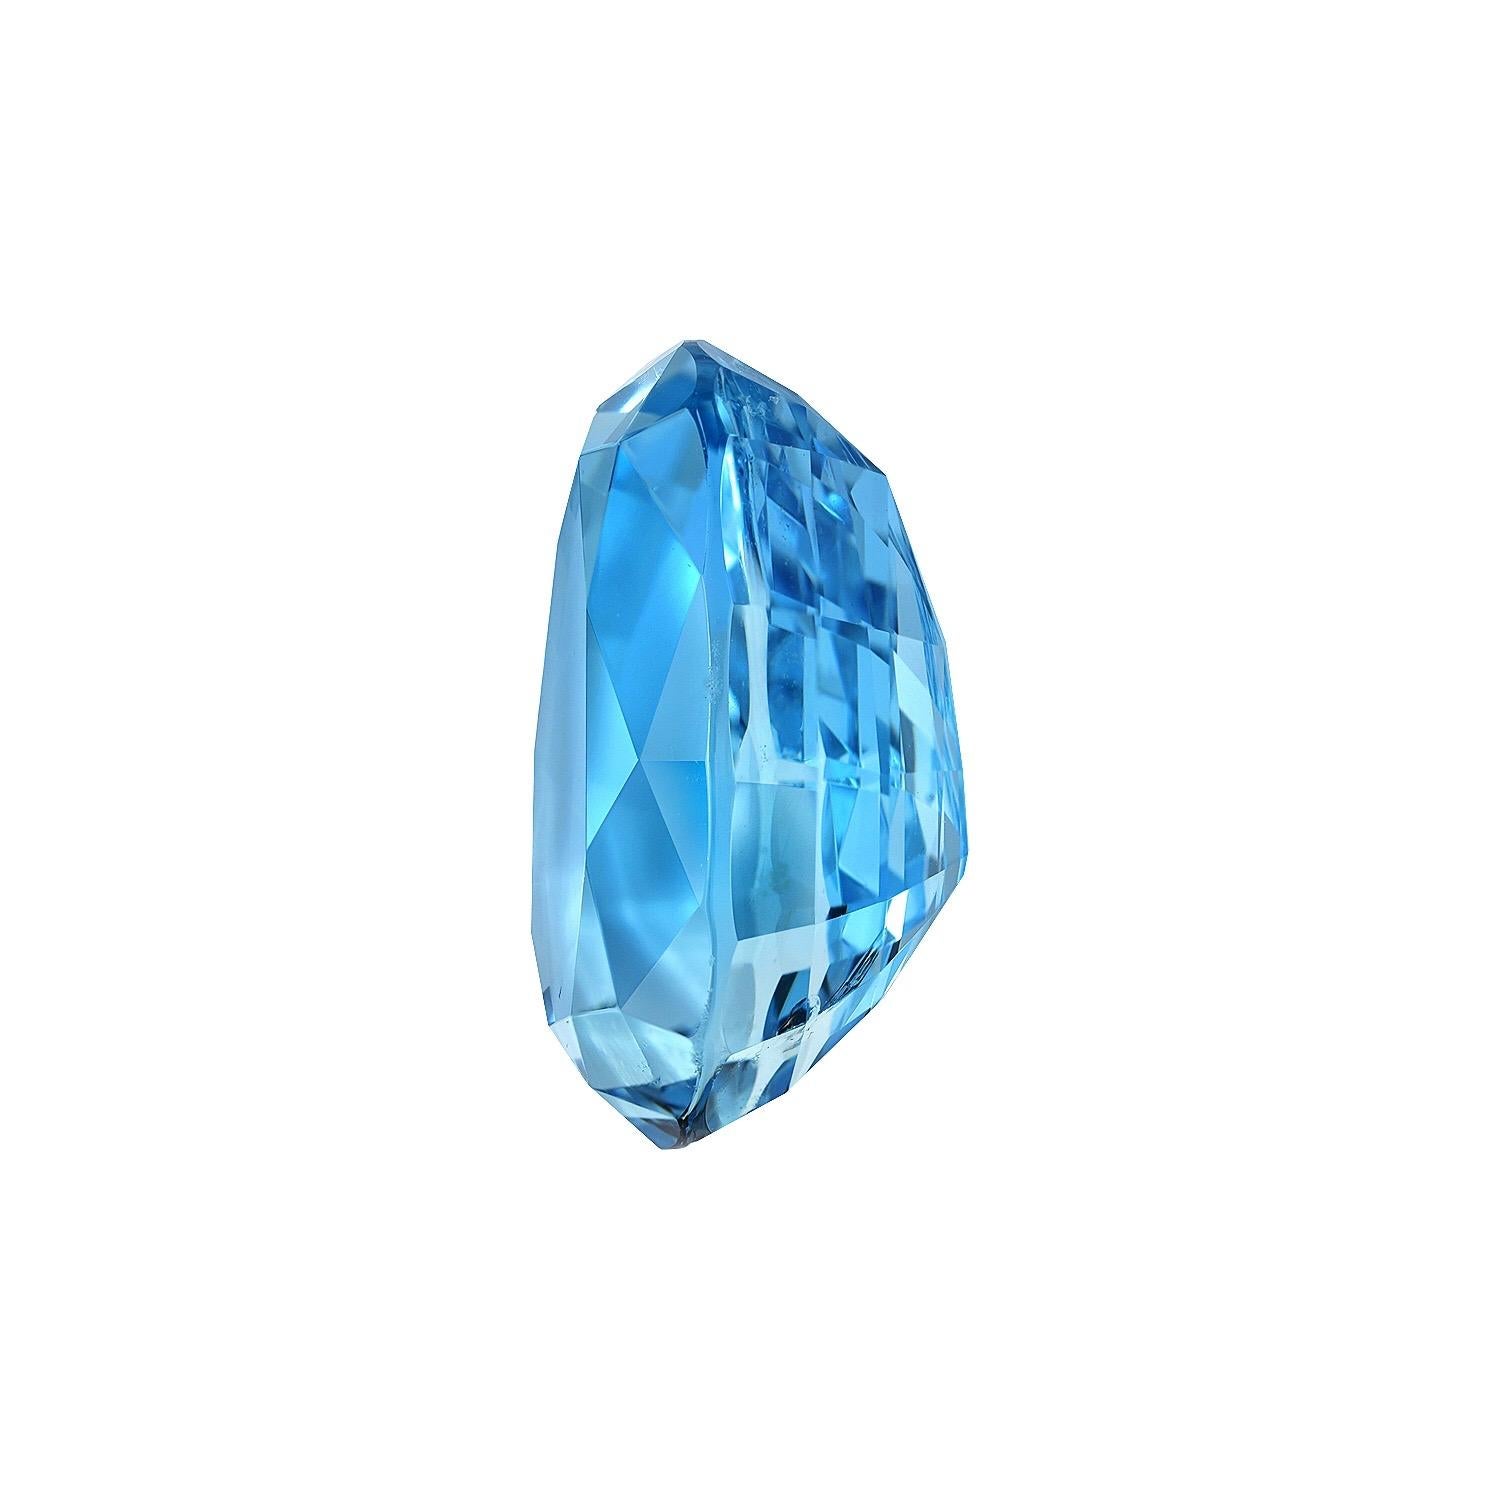 Very unique, natural 13.39 carat Aquamarine pear shape, offered loose to the world's most sophisticated gem collectors.
Returns are accepted and paid by us within 7 days of delivery.
As the birthstone of March and a favorite of water signs,